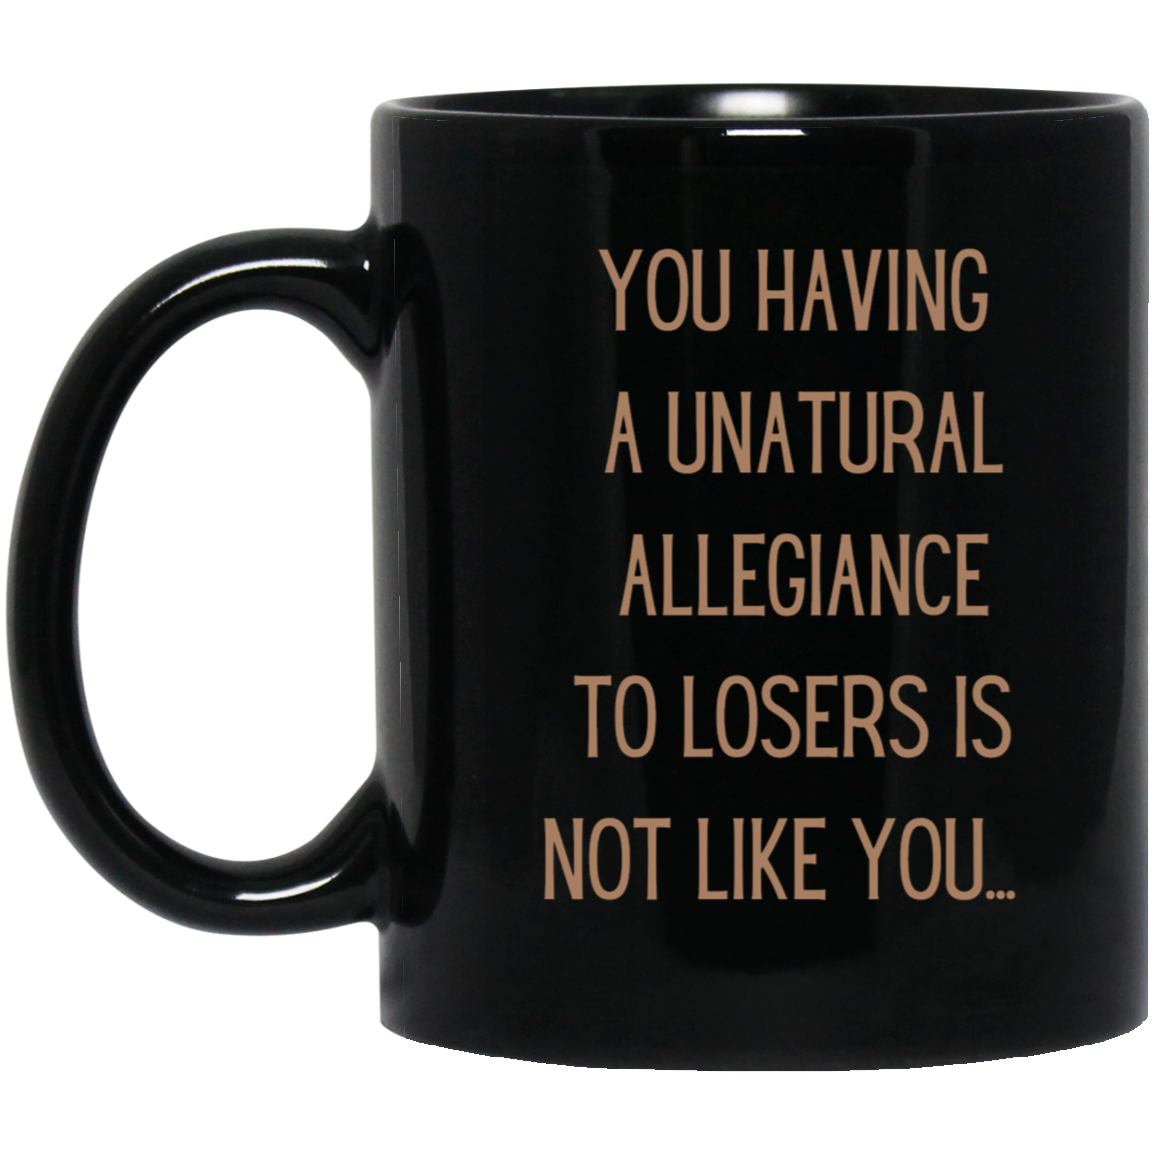 Katt Williams said it best: You having a unatural allegiance to losers is not like you....11oz Black Mug